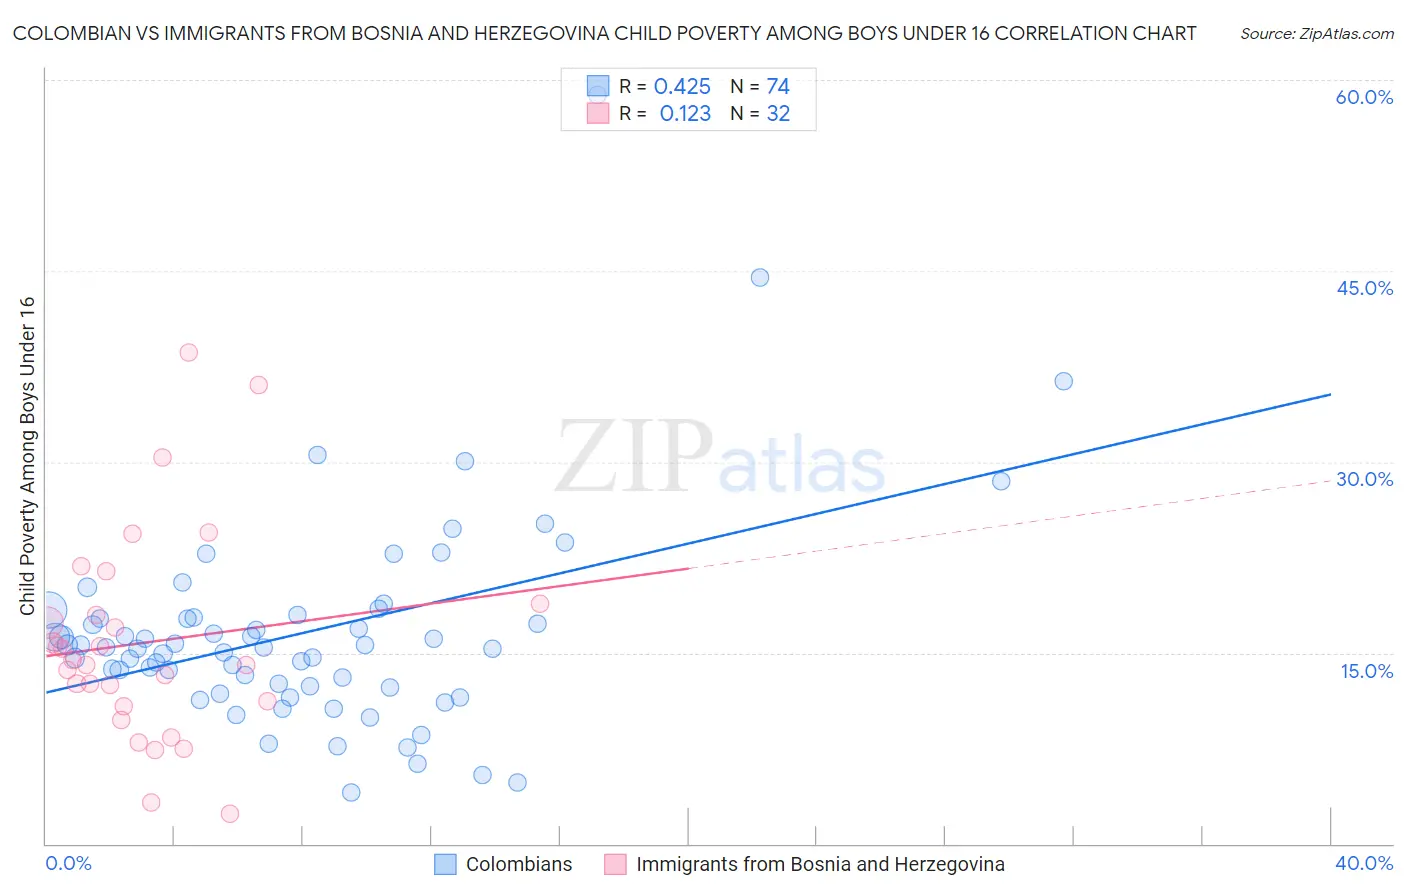 Colombian vs Immigrants from Bosnia and Herzegovina Child Poverty Among Boys Under 16